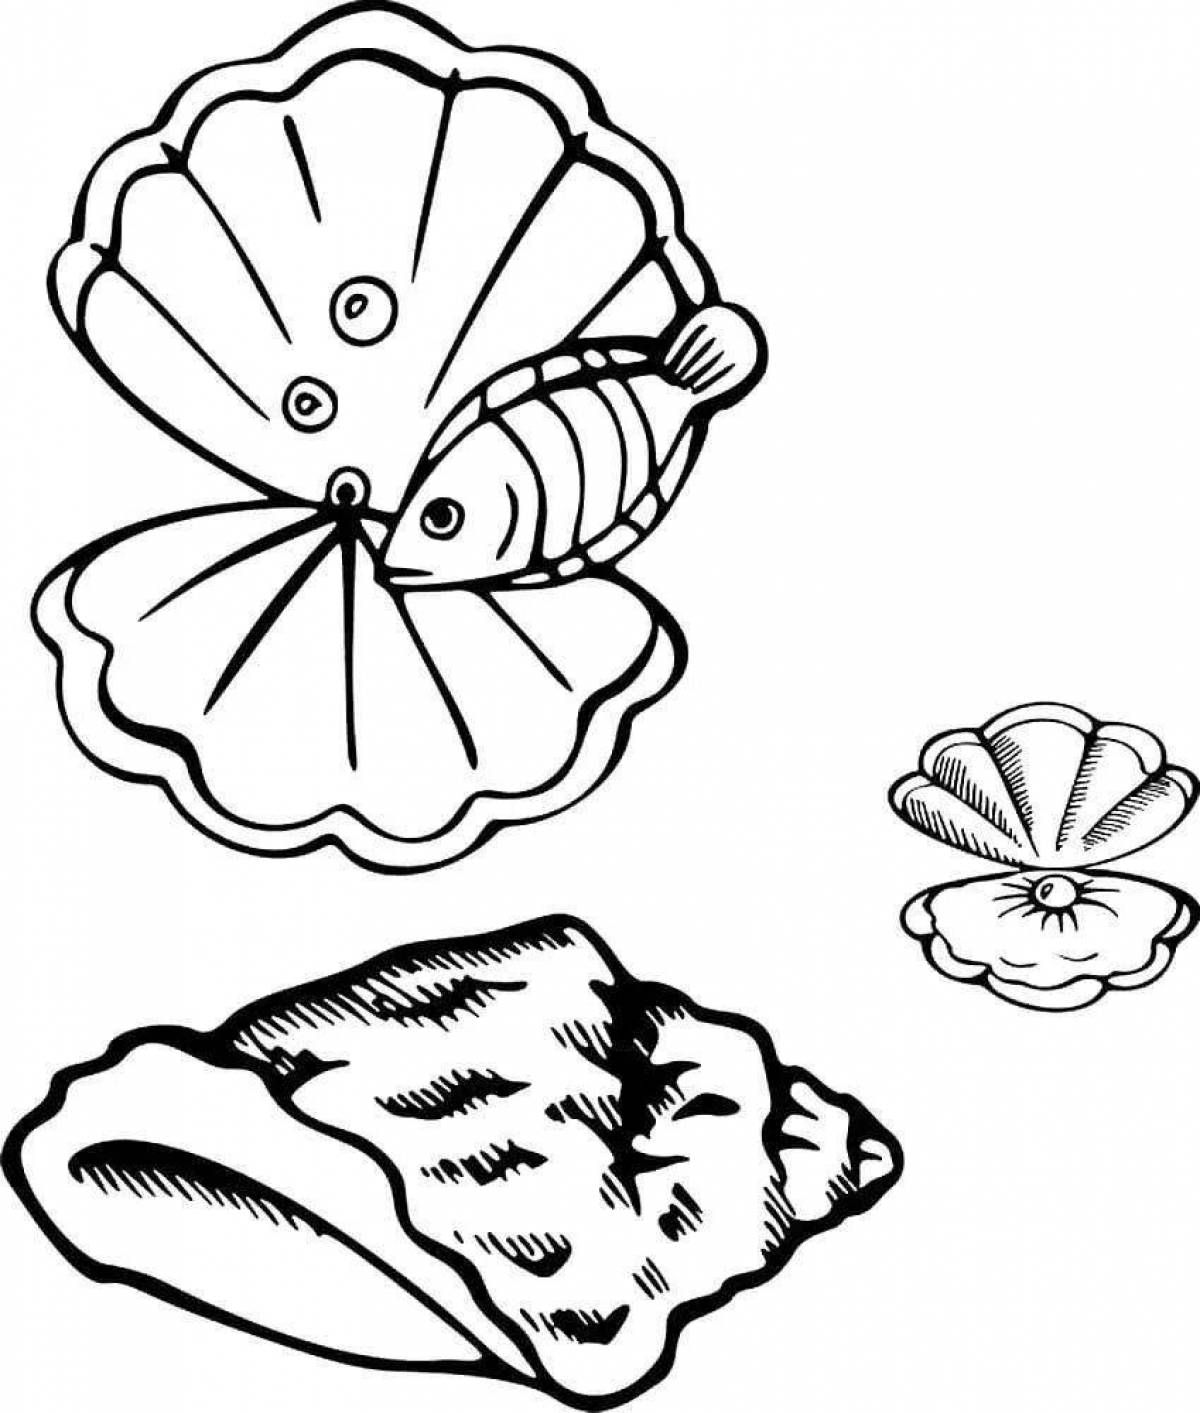 Vivacious shell coloring book for kids